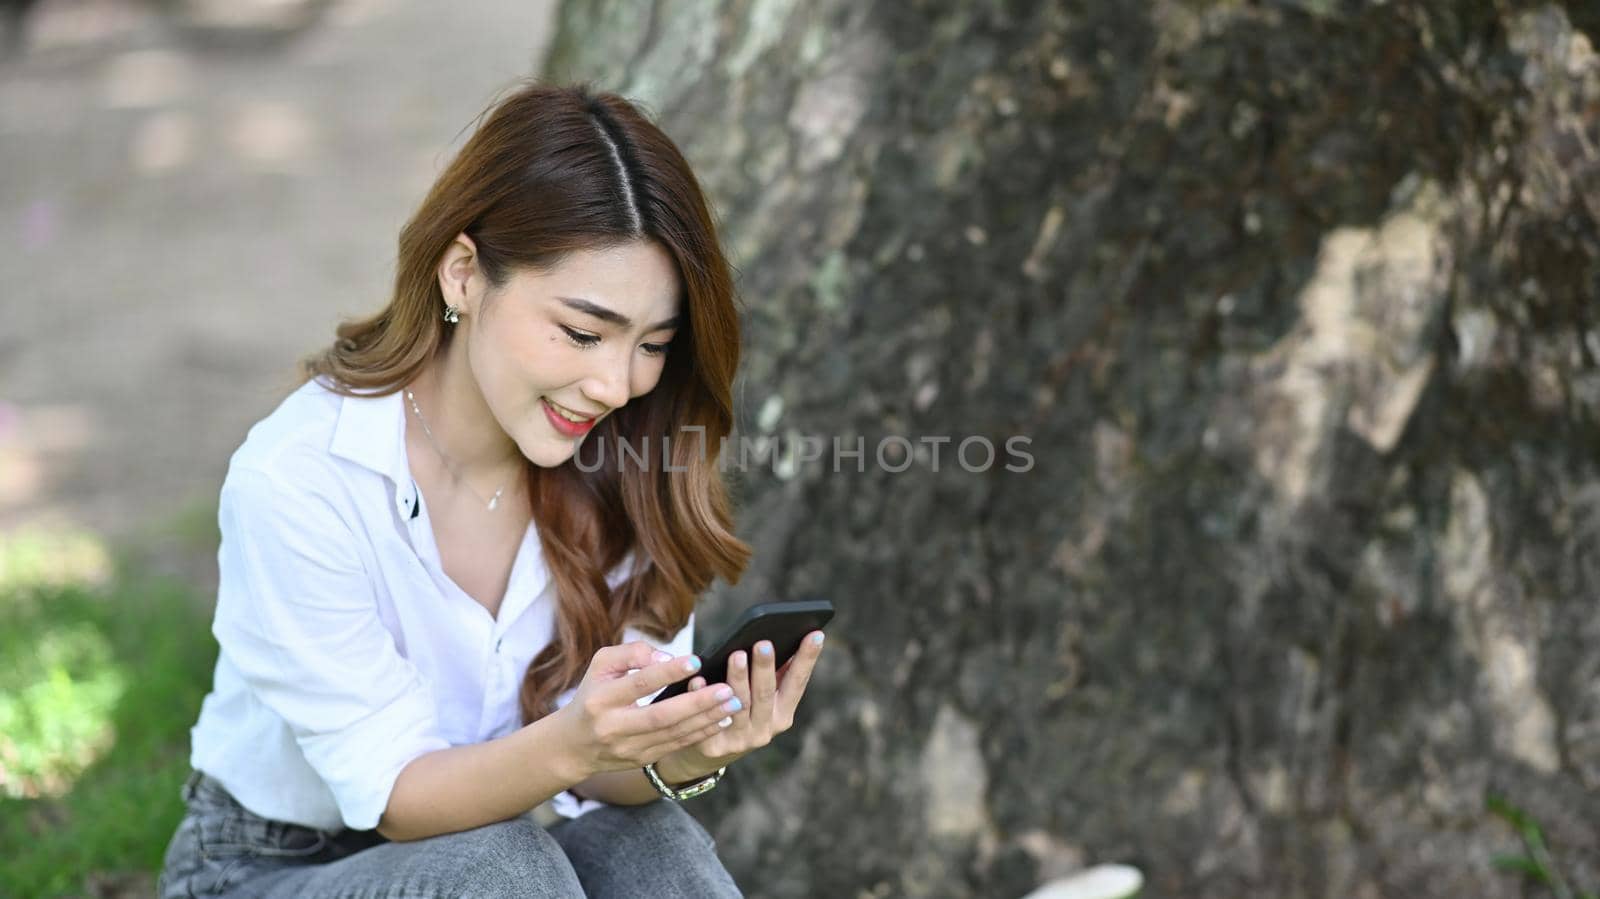 Beautiful young woman sitting under tree in the park and using smart phone.